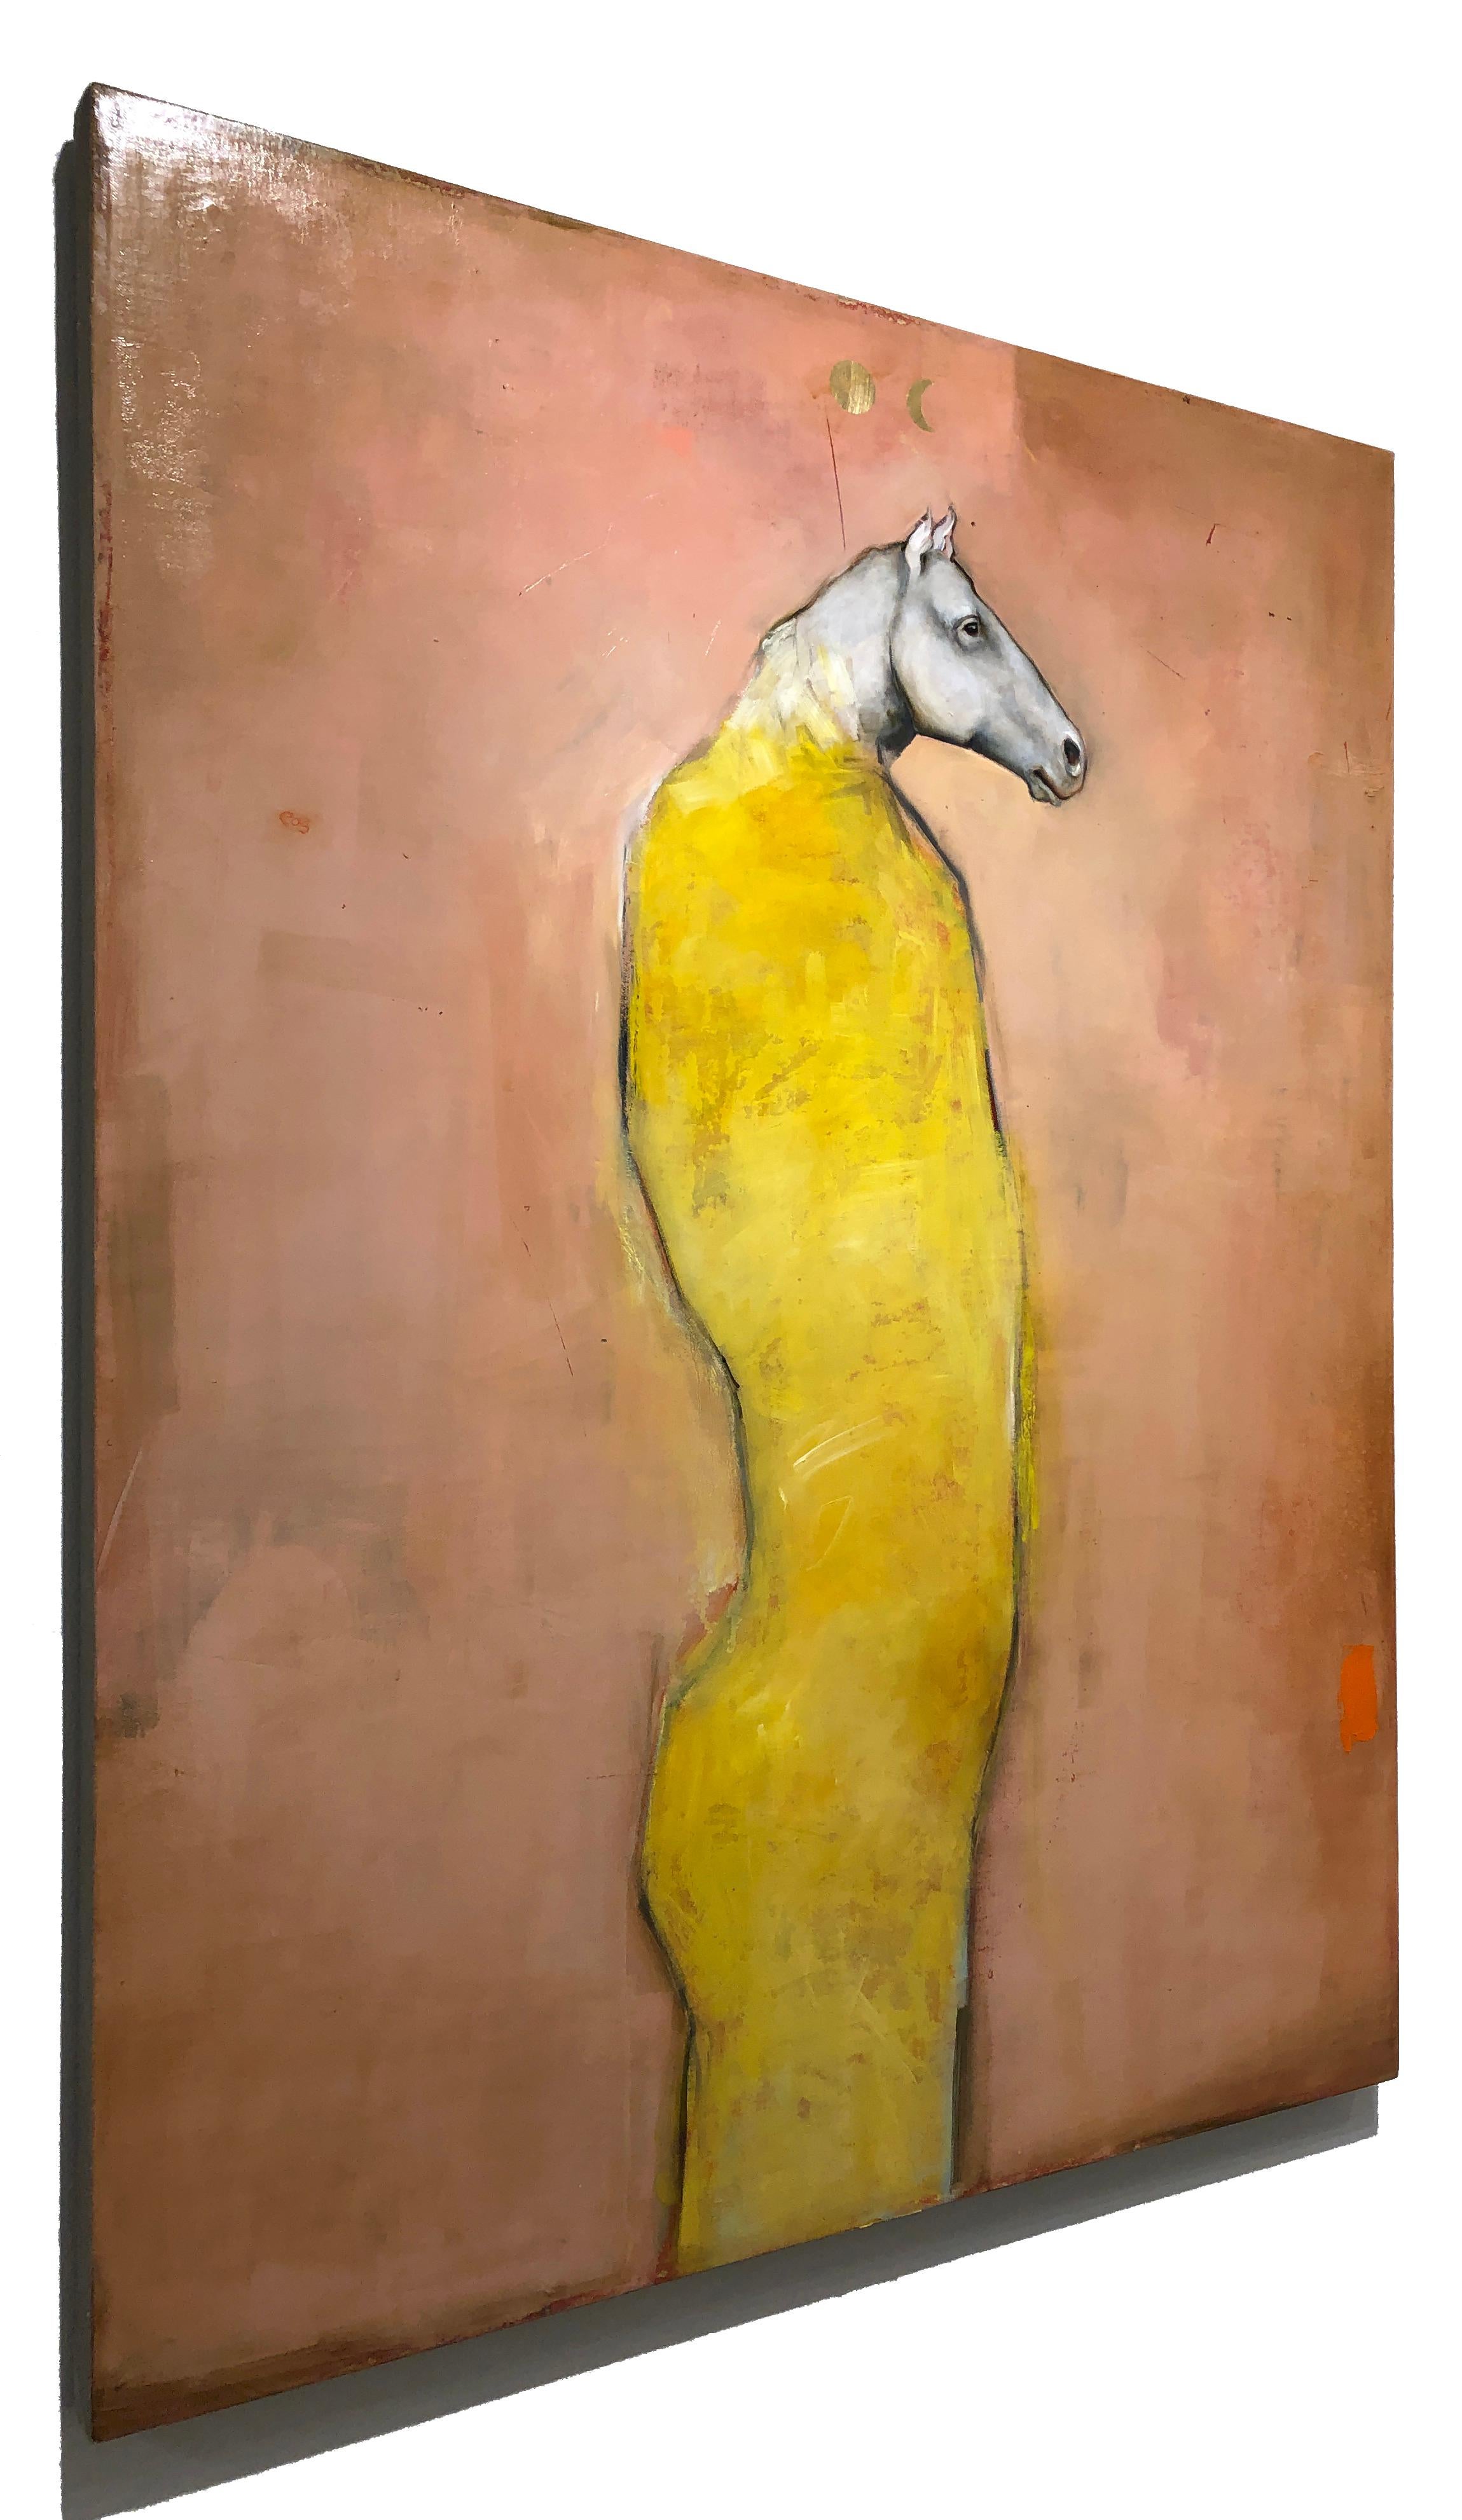 Eos -Mythical horse figure, Oil on canvas, pop contemporary whimsical painting - Orange Portrait Painting by Michele Mikesell